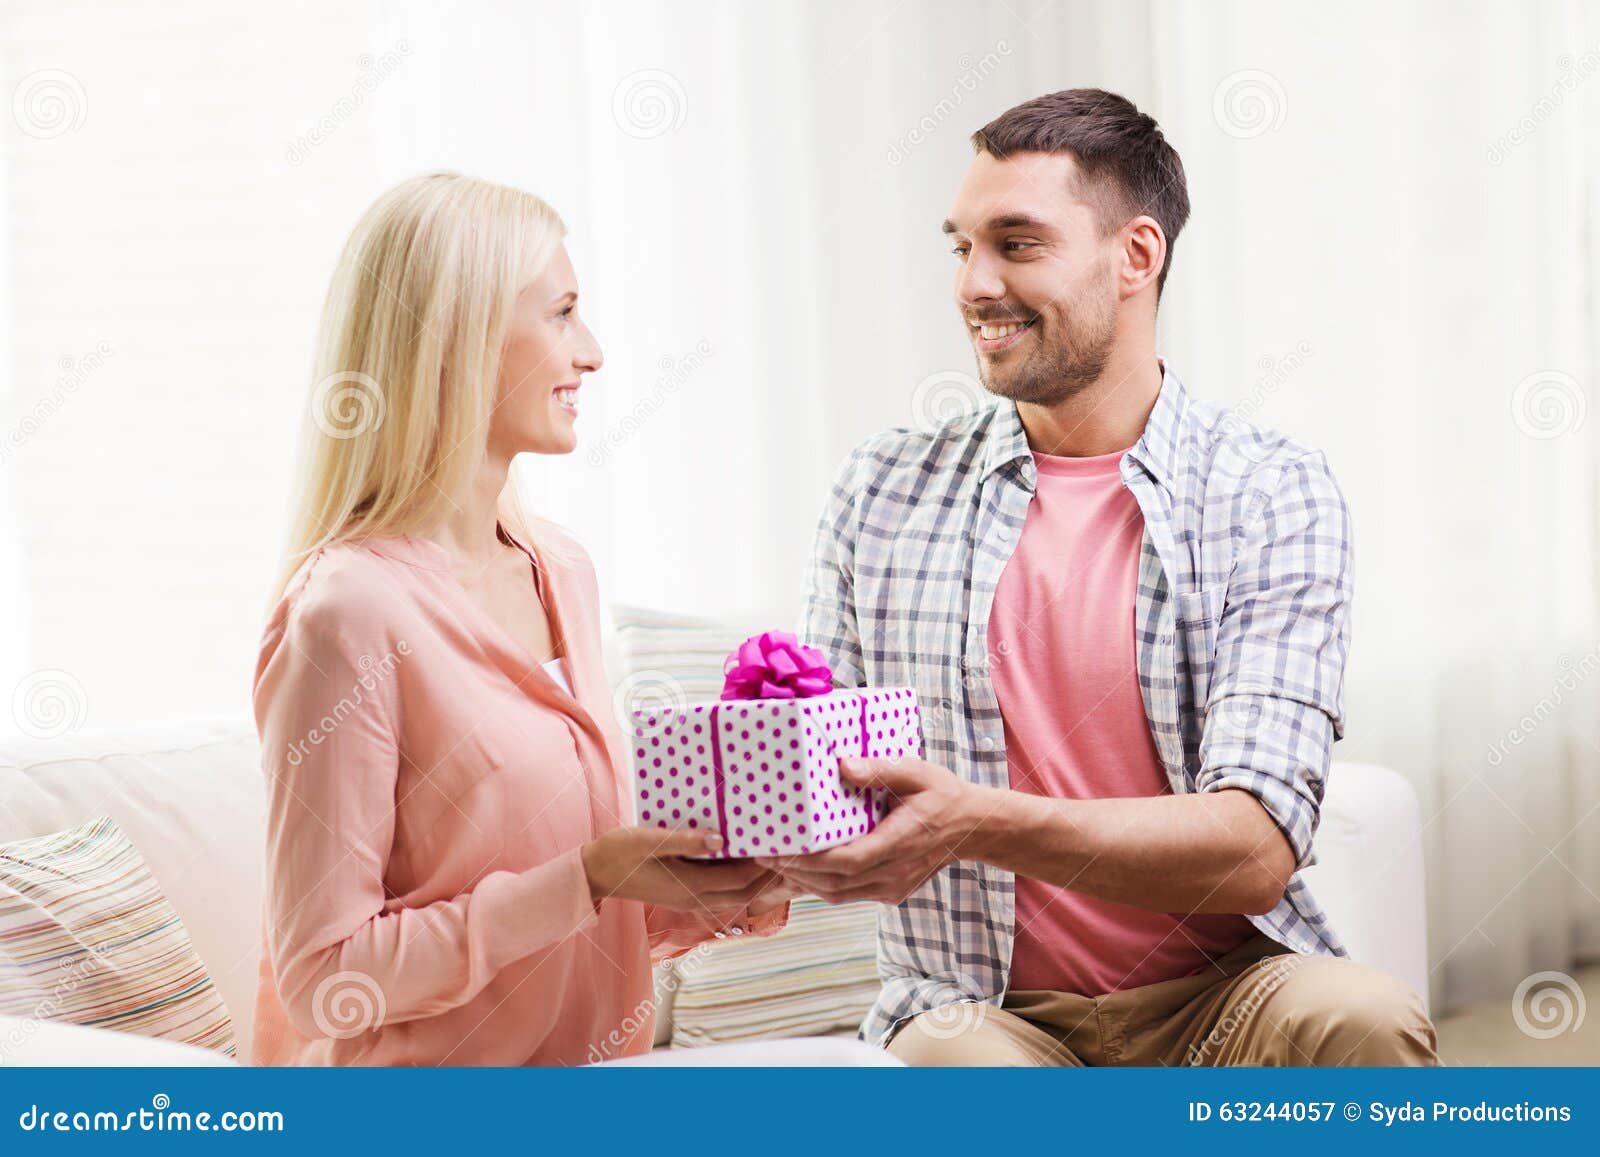 Premium Vector  Happy man holds a large gift box with a bow in his hands  vector